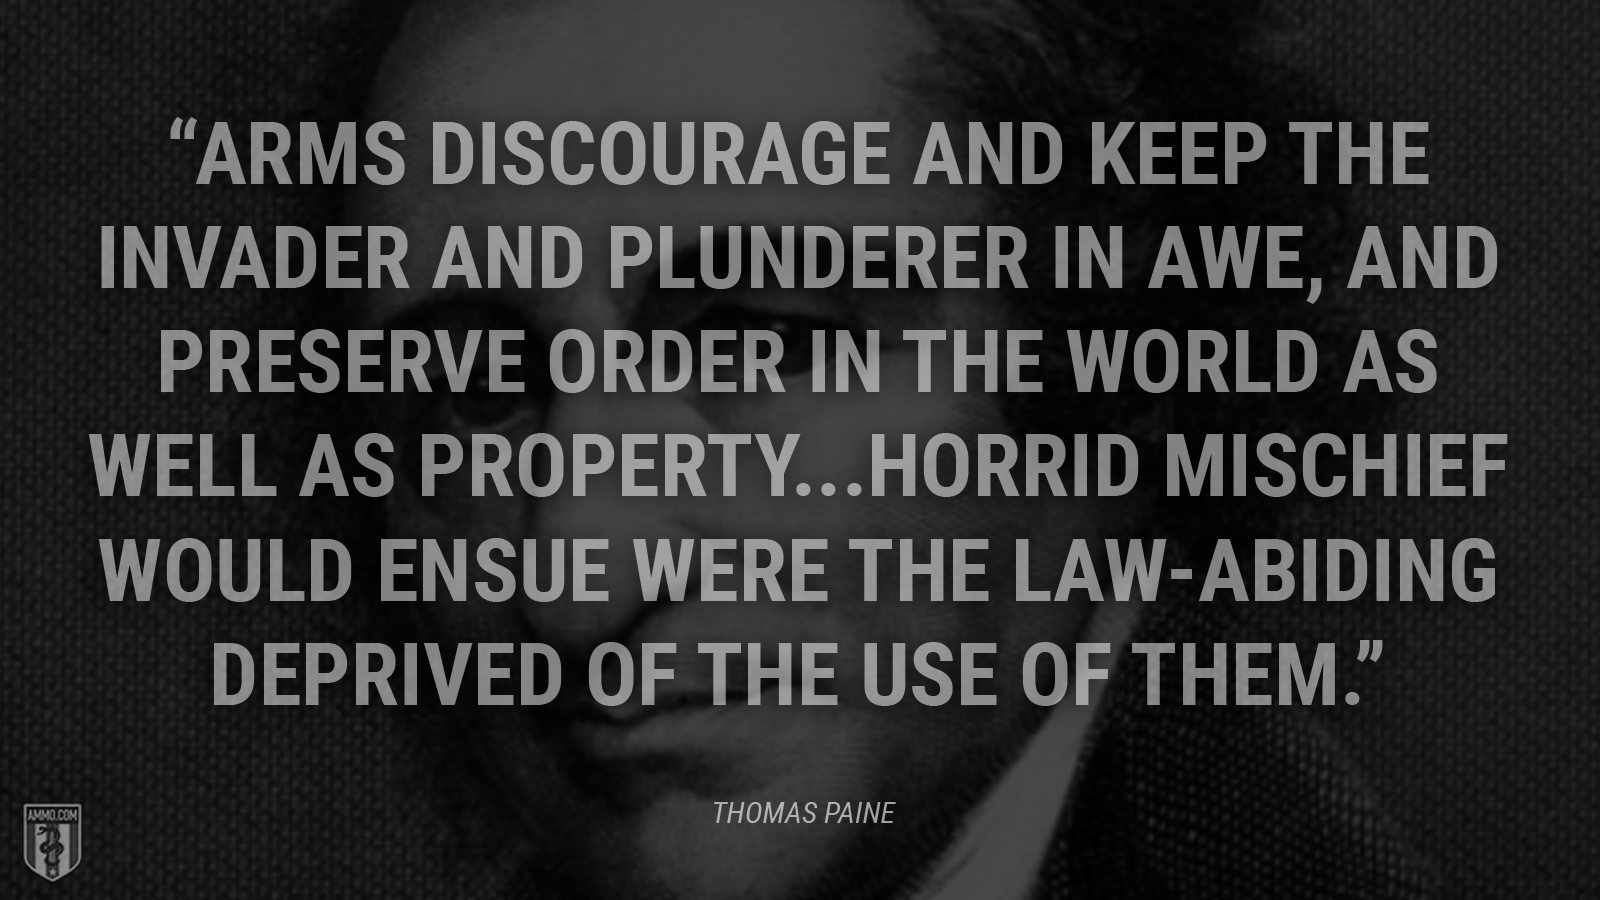 “Arms discourage and keep the invader and plunderer in awe, and preserve order in the world as well as property...Horrid mischief would ensue were the law-abiding deprived of the use of them.” - Thomas Paine